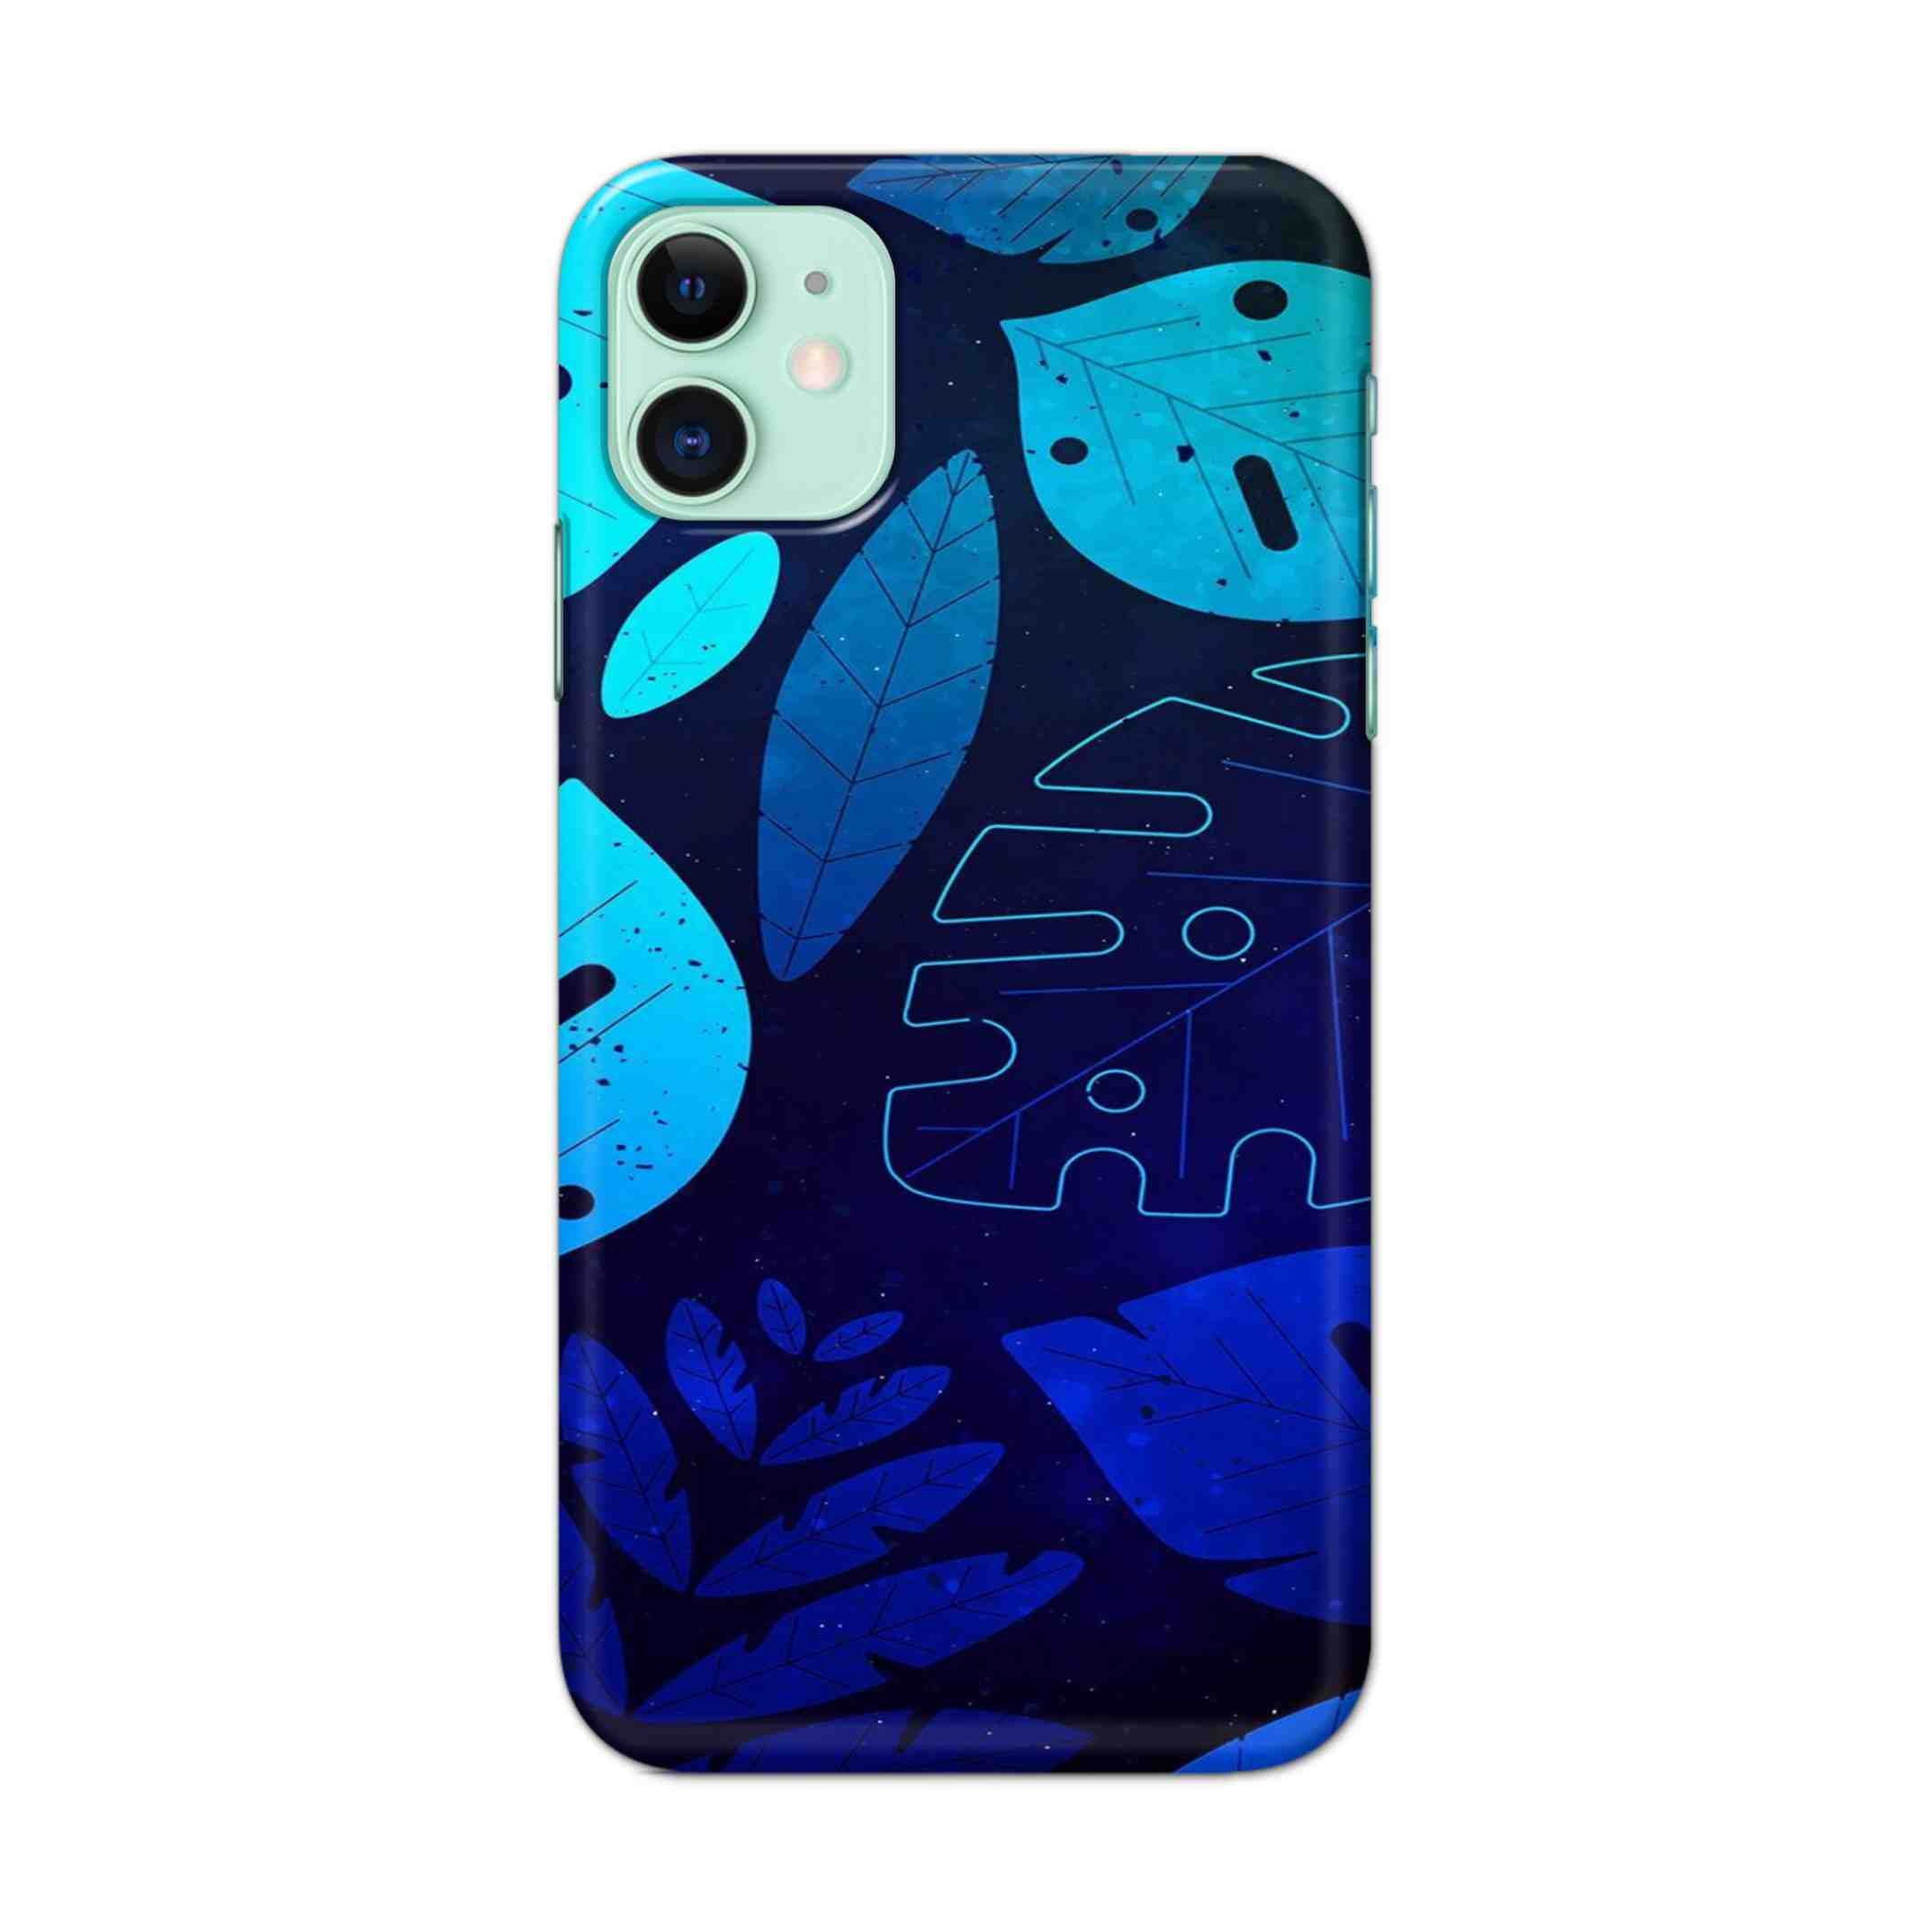 Buy Neon Leaf Hard Back Mobile Phone Case/Cover For iPhone 11 Online